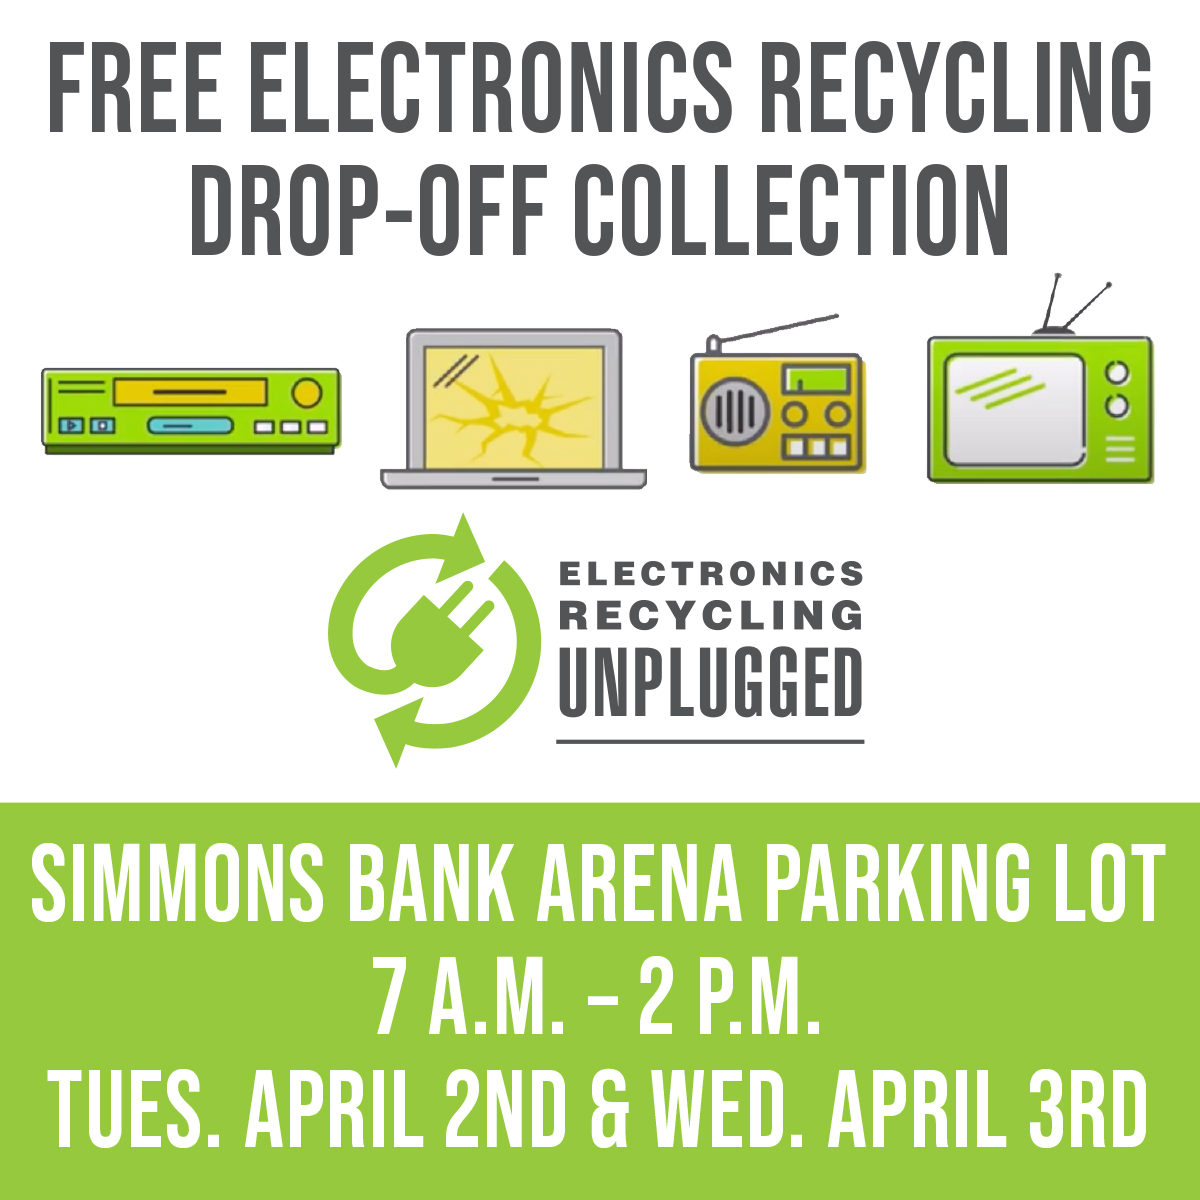 Get Ready For Our Free Electronics Recycling Drop-Off Event